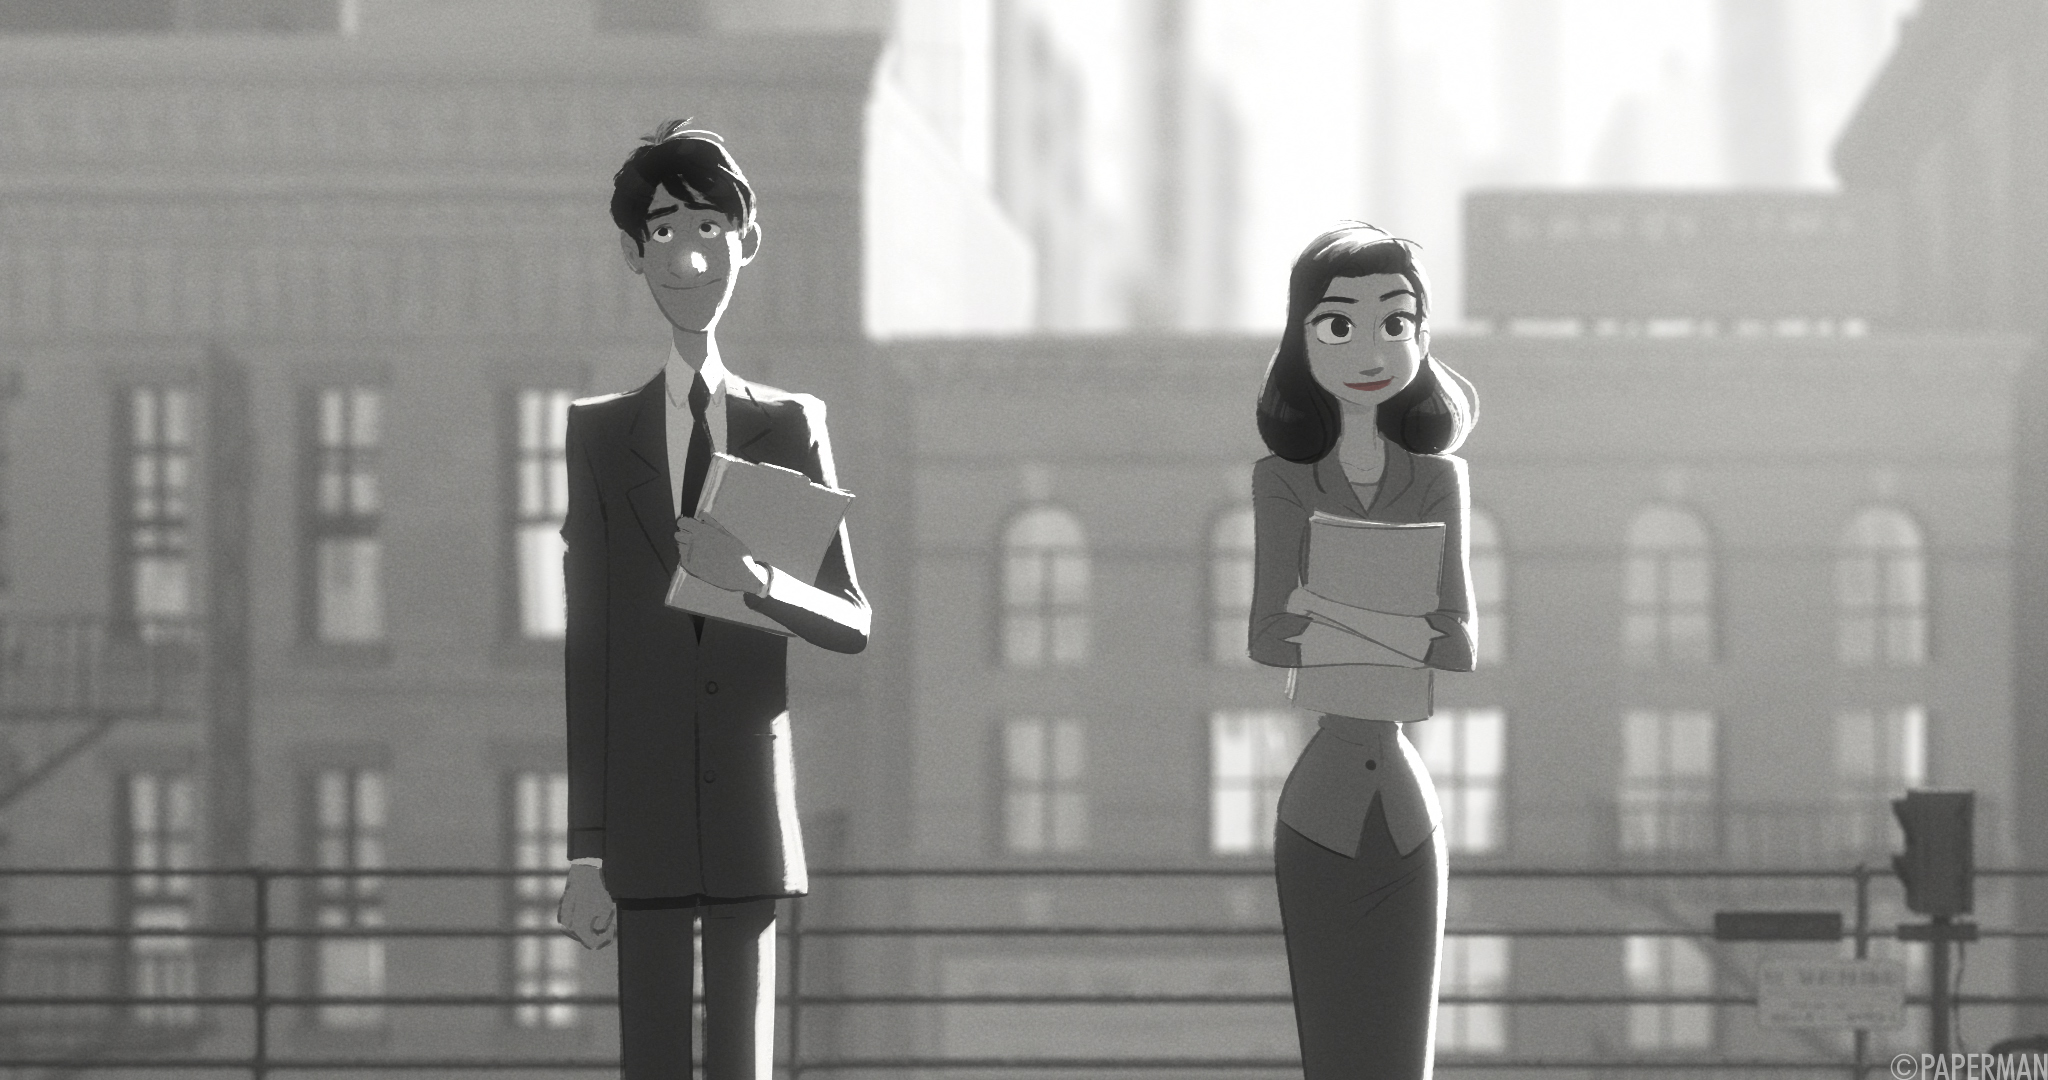 A scene from "Paperman," part of the Oscar-nominated short film program.